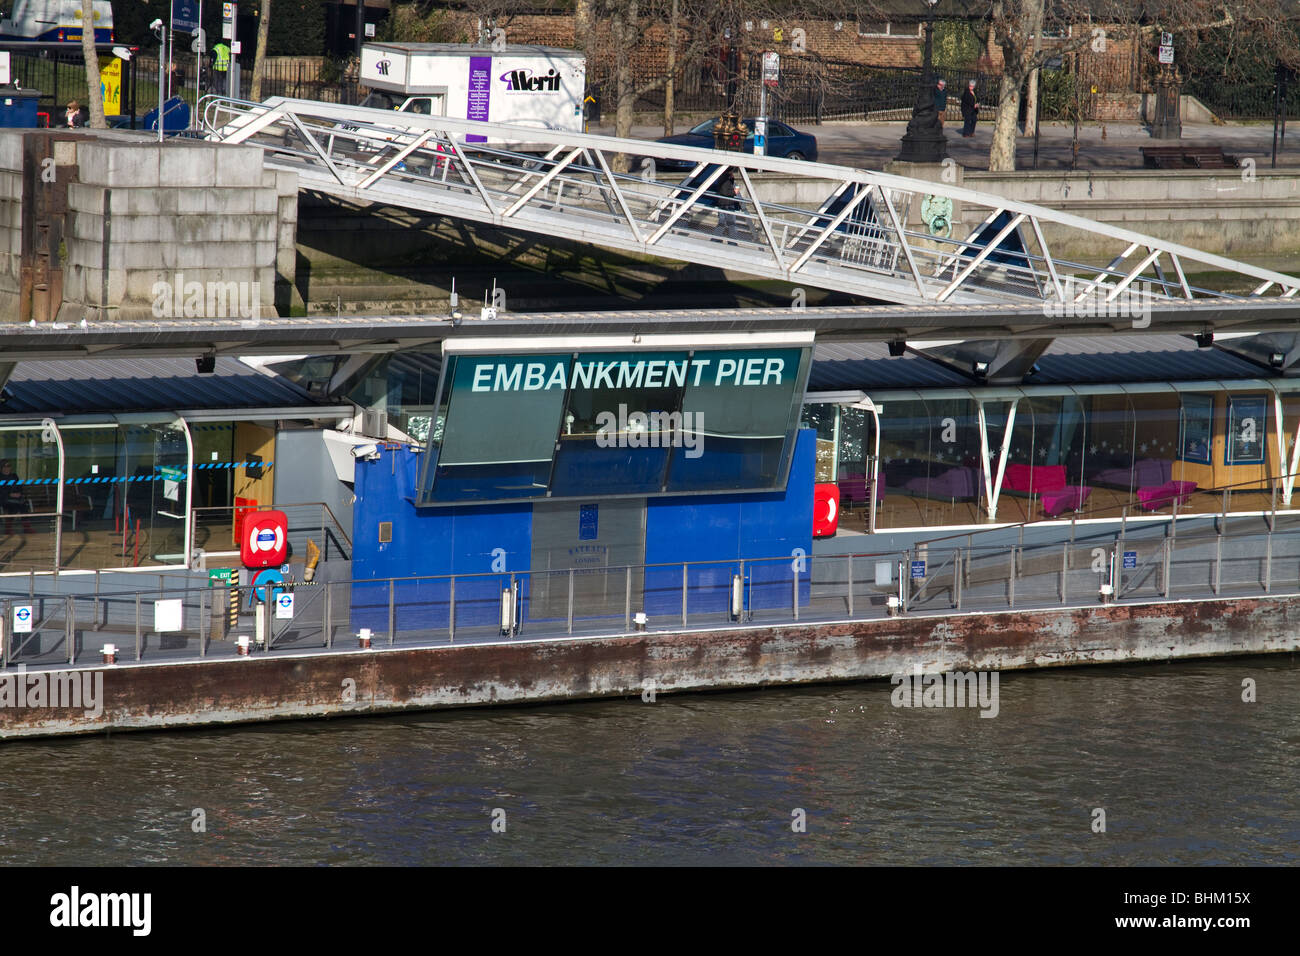 Embankment pier on the northbank of the Thames, London Stock Photo